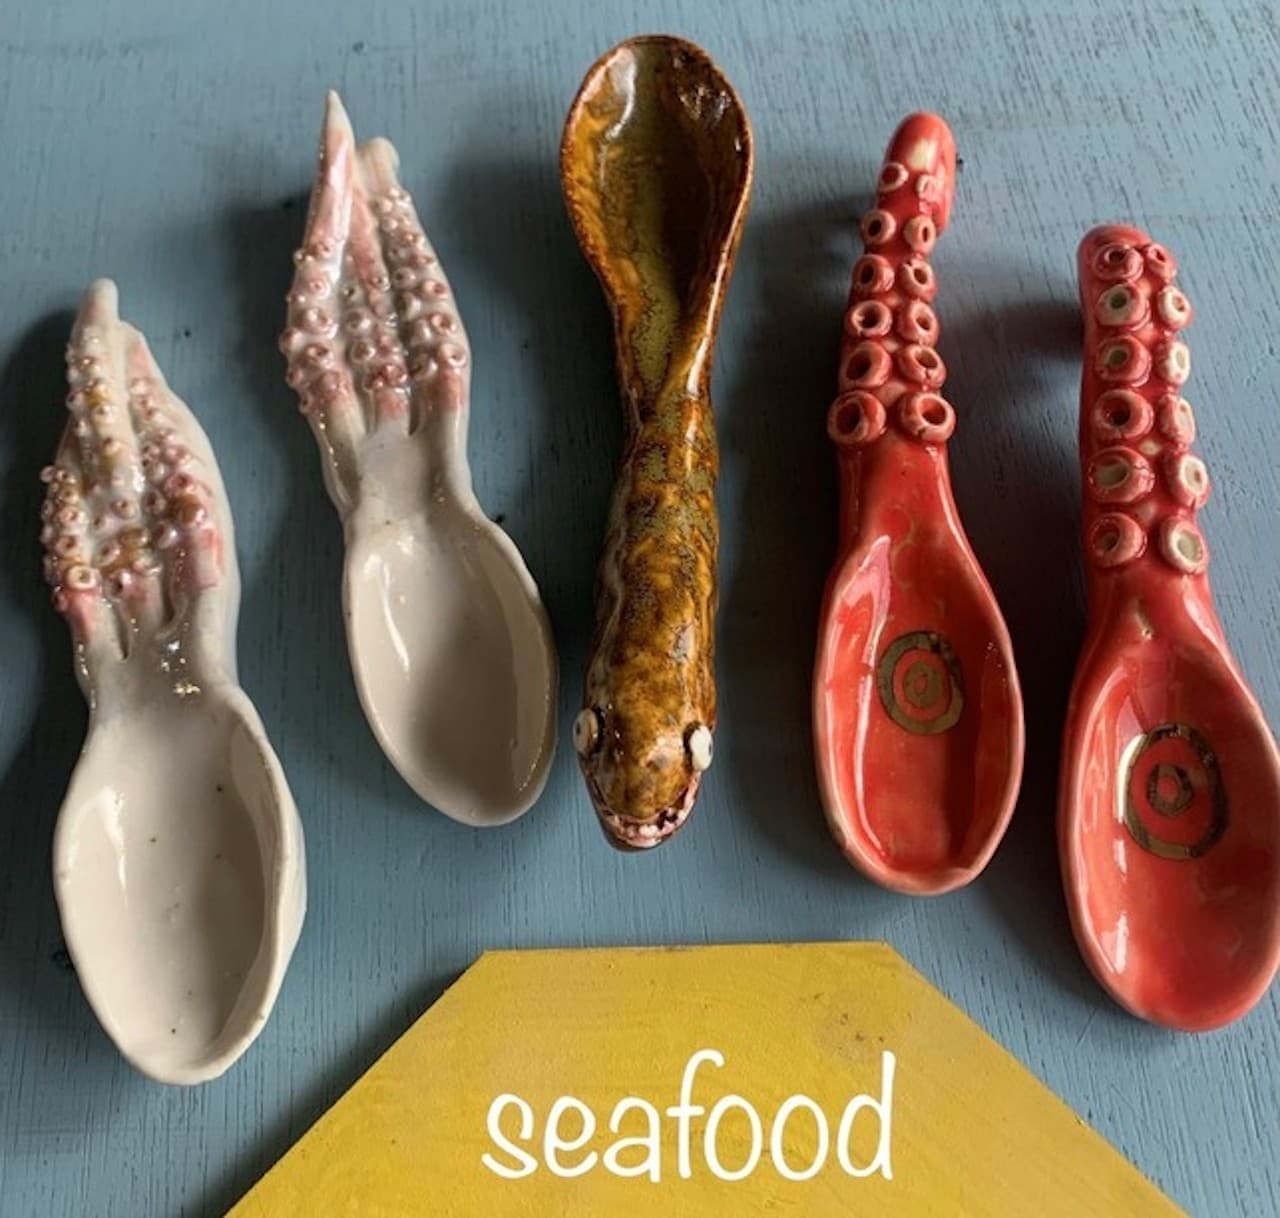 Octopus and moray eel pottery spoons are now available on Villevan Online